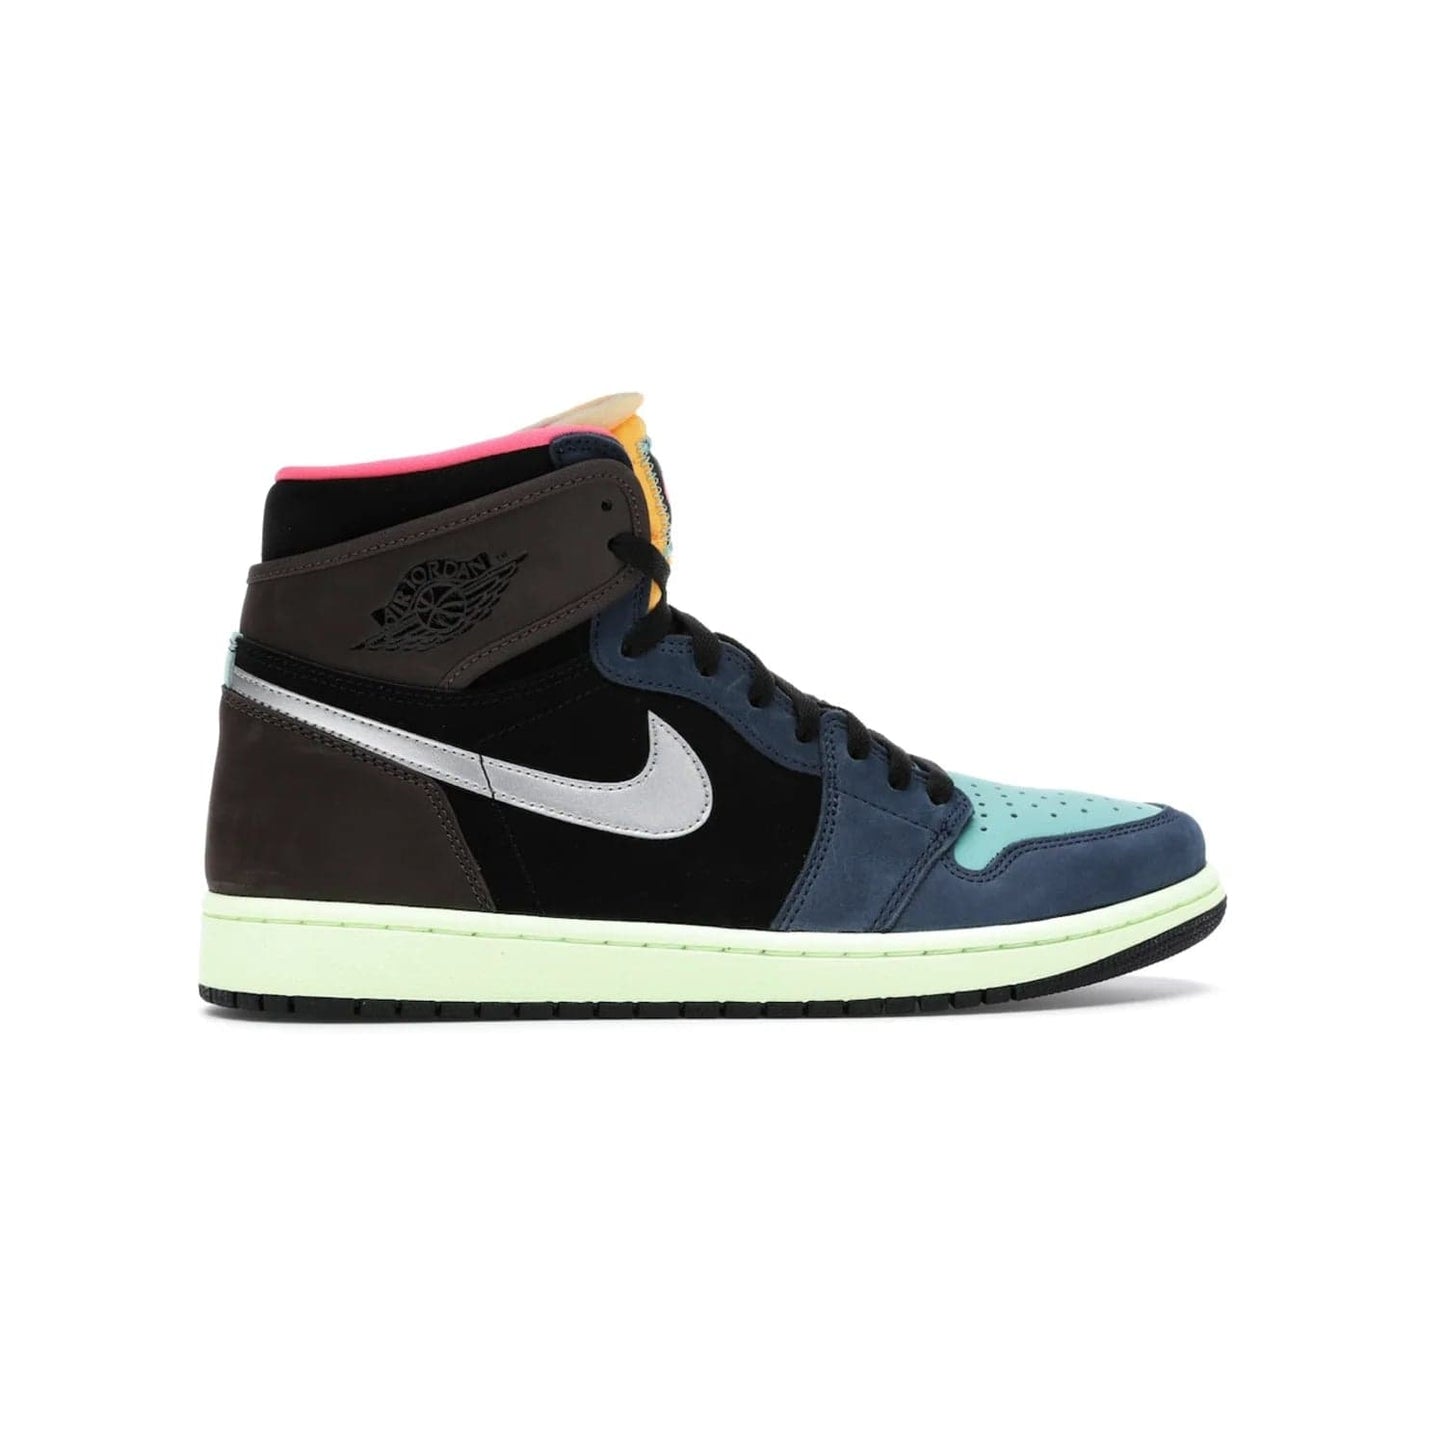 Jordan 1 Retro High Tokyo Bio Hack - Image 36 - Only at www.BallersClubKickz.com - Step up your sneaker game with the Air Jordan 1 Retro High Tokyo Bio Hack! Unique design featuring multiple materials and eye-catching colors. Metallic leather Swoosh and light green midsole for a stunning look. Available now for just $170.